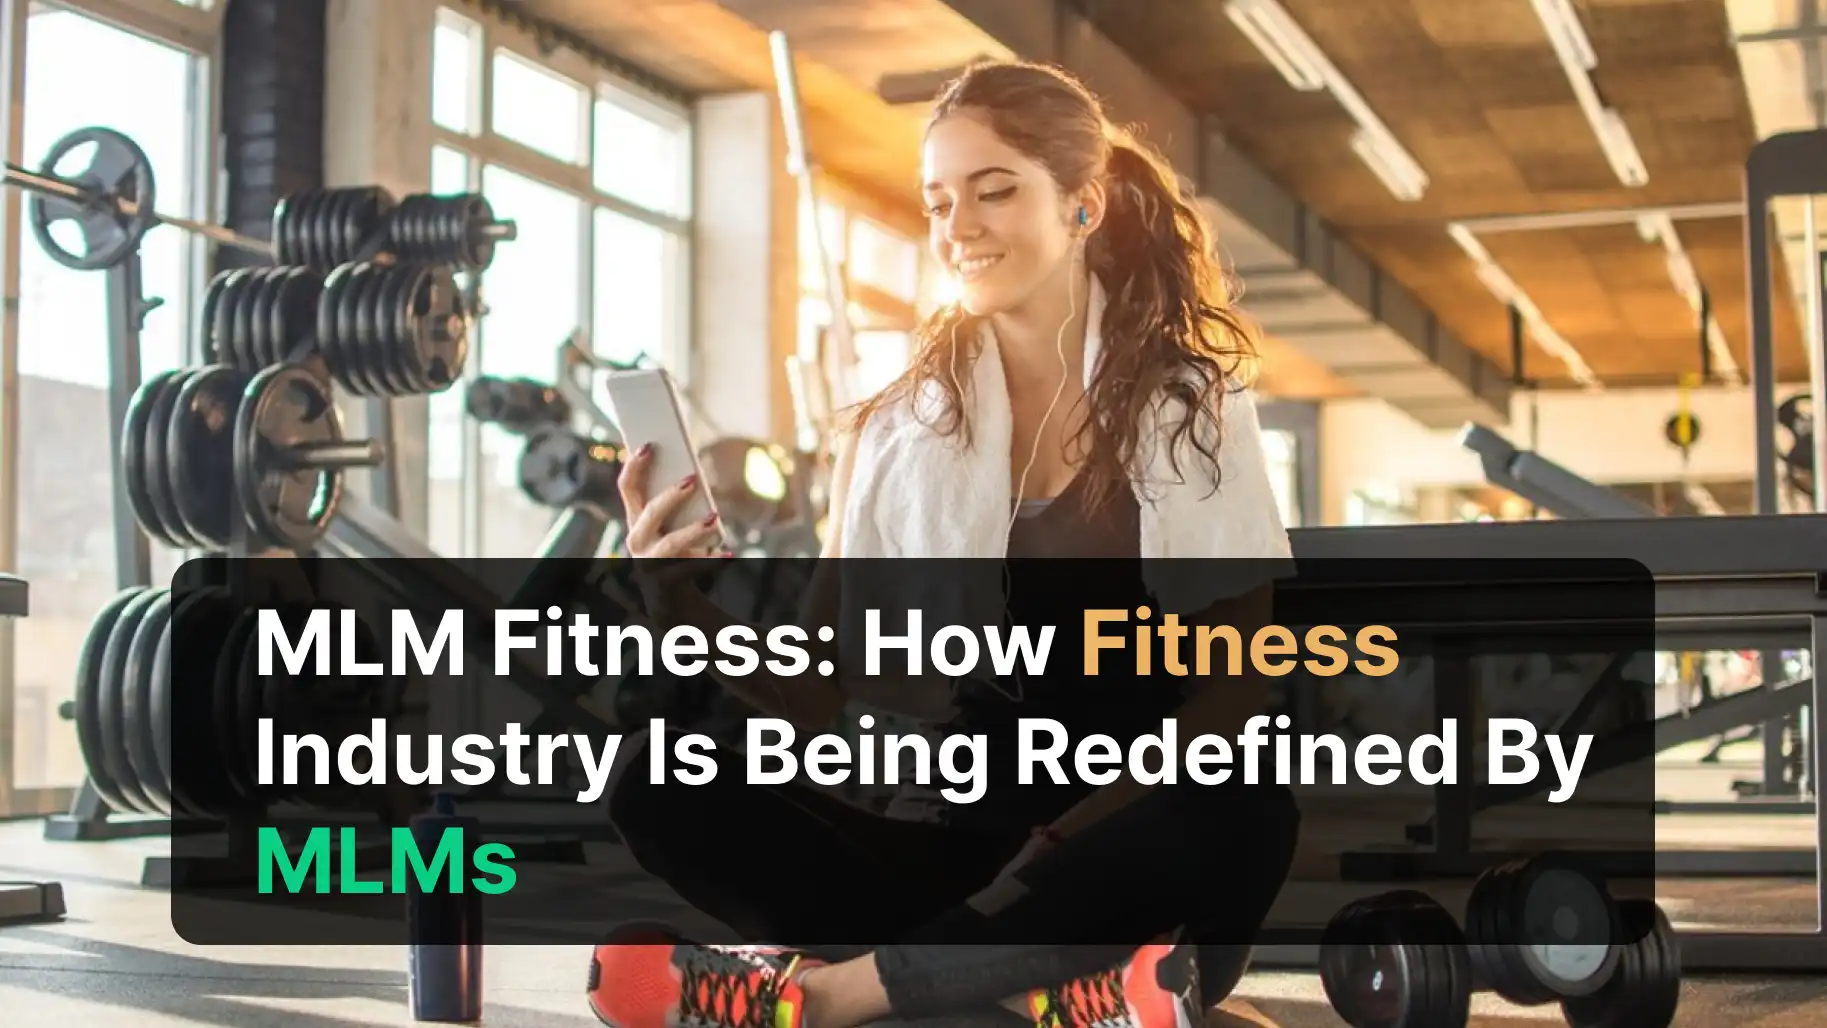 MLM Fitness: How Fitness Industry Is Being Redefined By MLMs